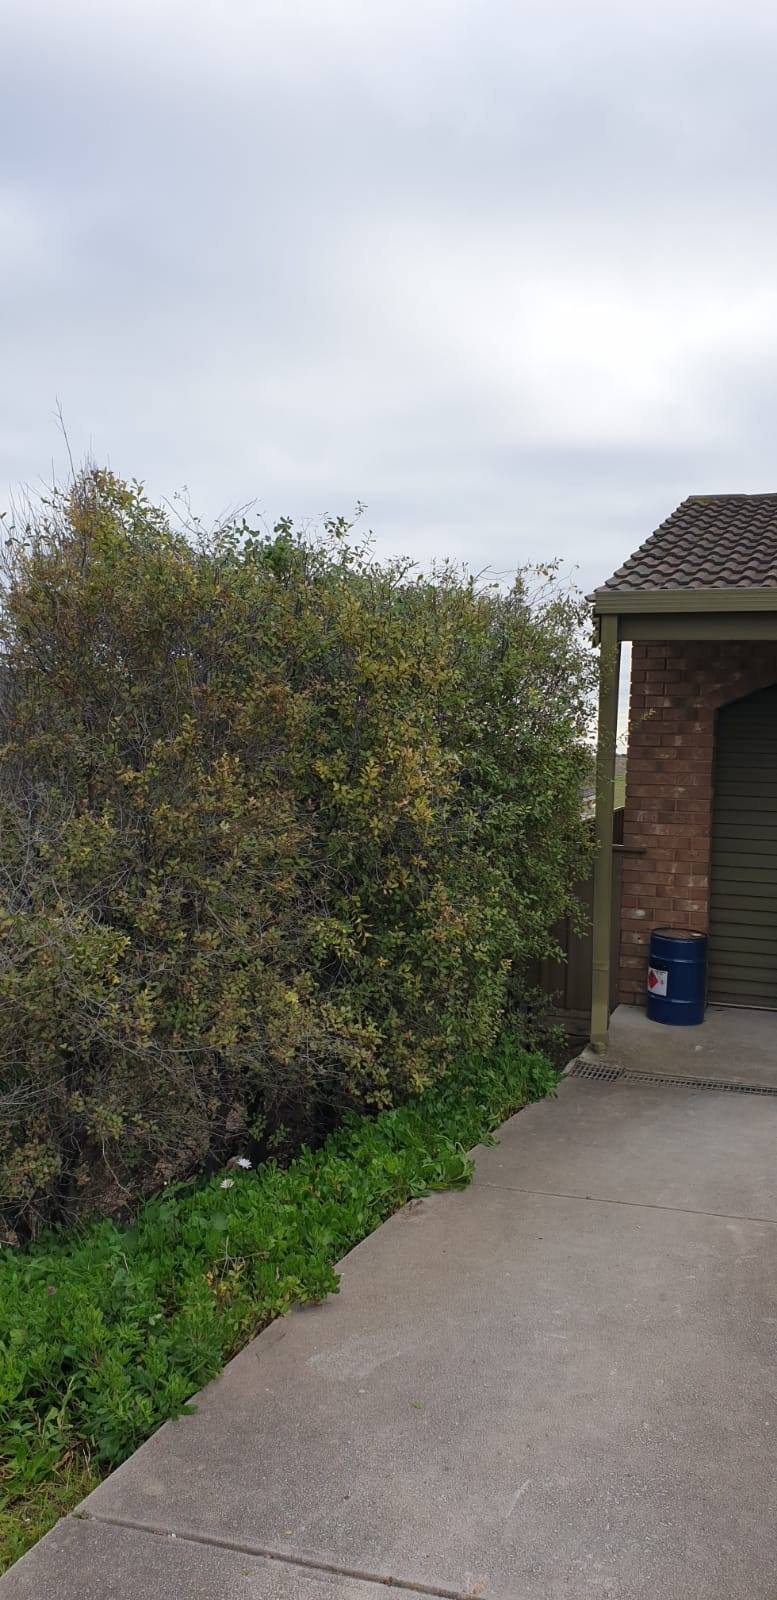 A Bark Up The Right Tree - Adelaide Tree Removals is sharing a COVID-19 update at Hallett Cove 5158.14 August Adelaide, SA, Australia